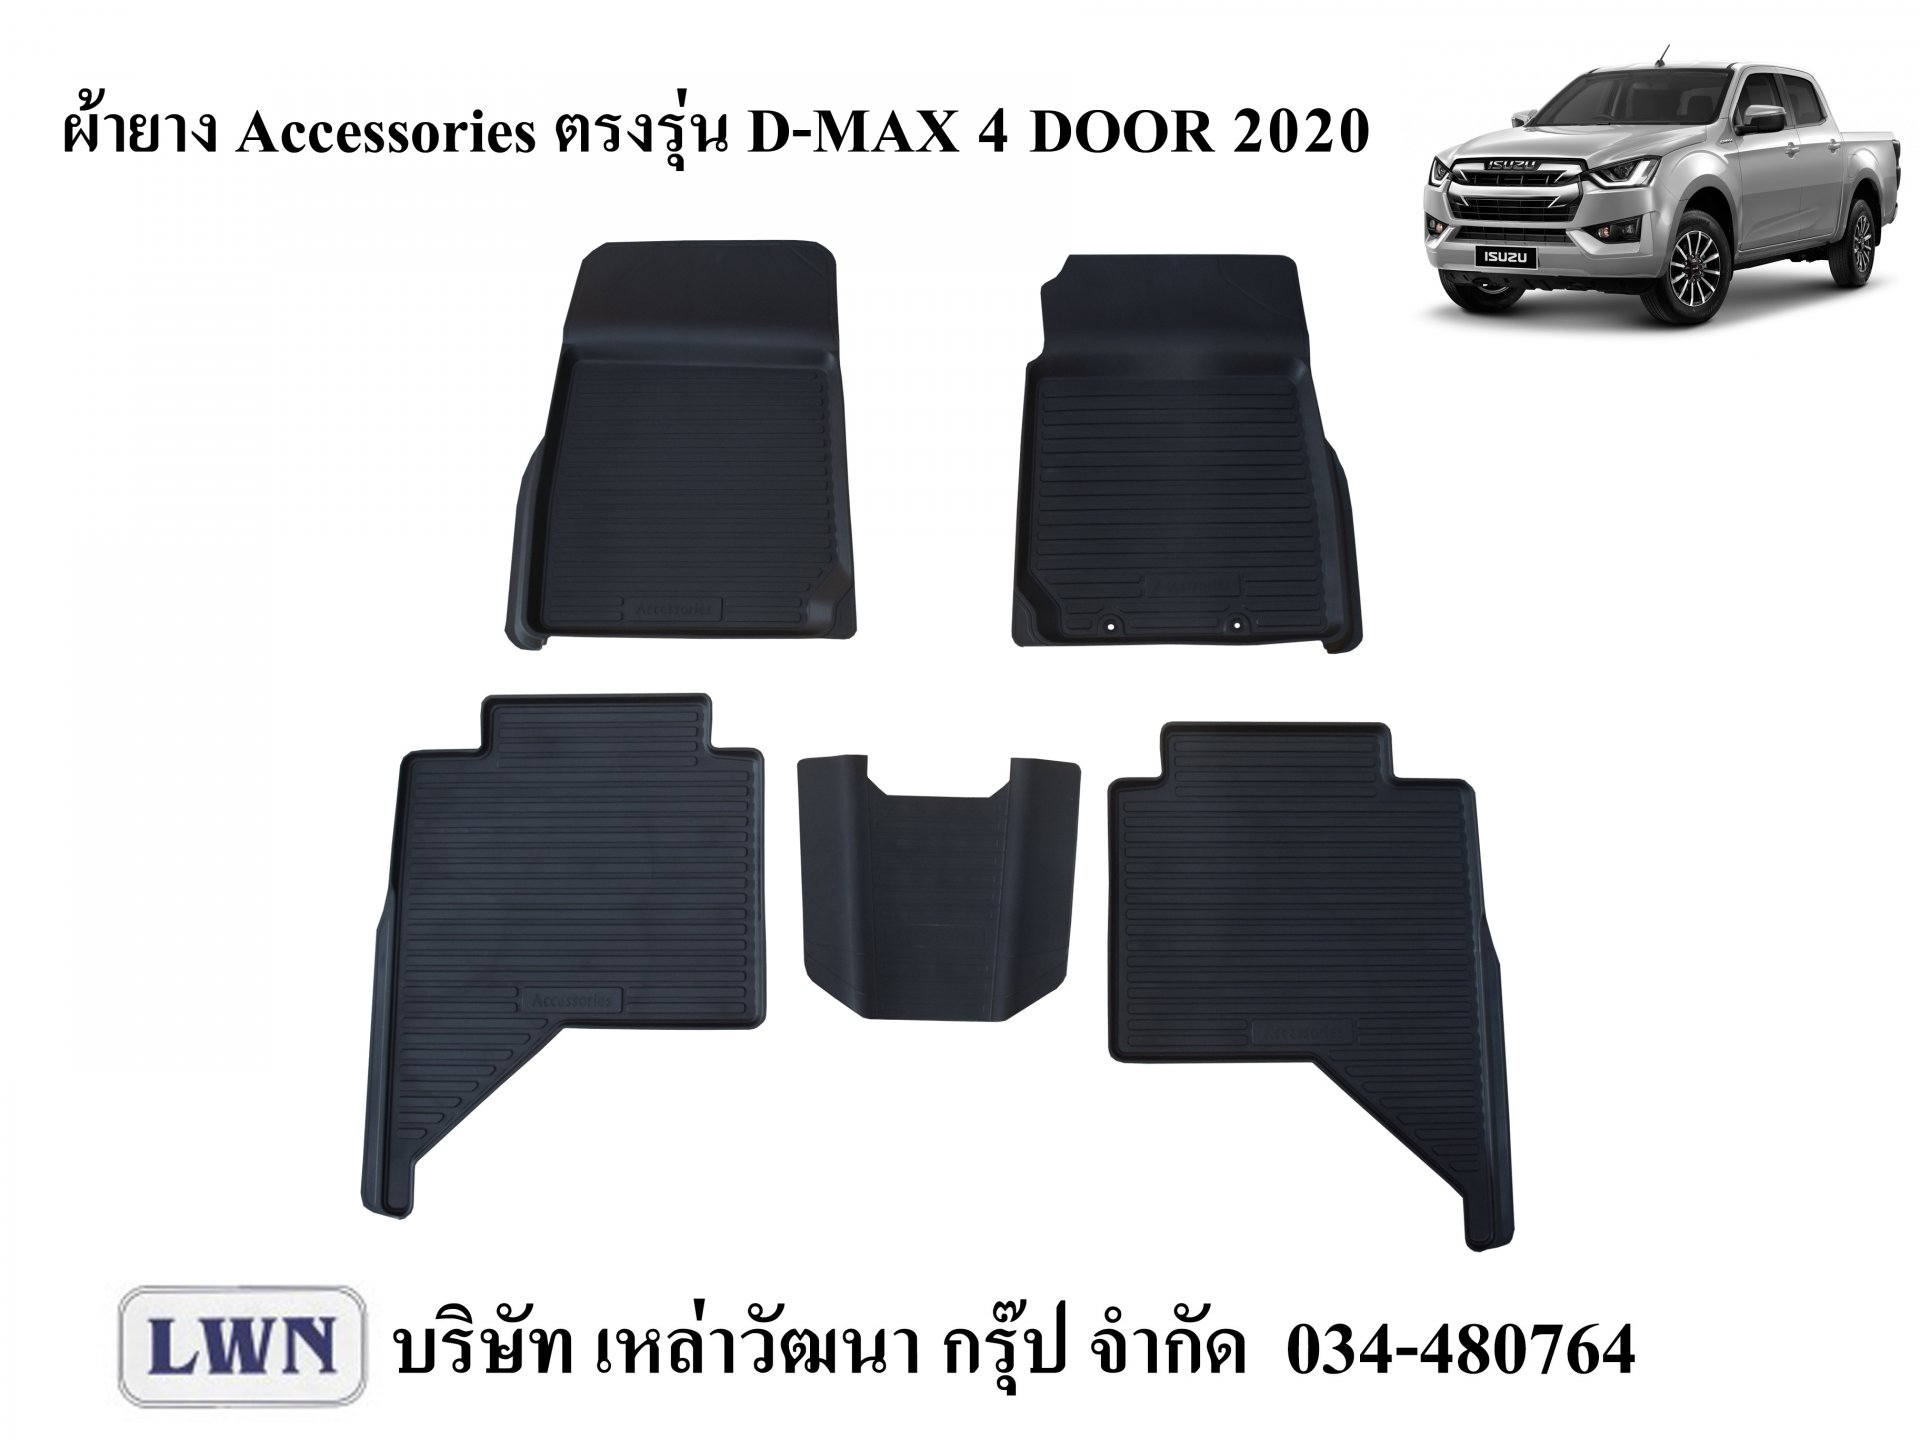 ACC-New D-max Double Cab 2020